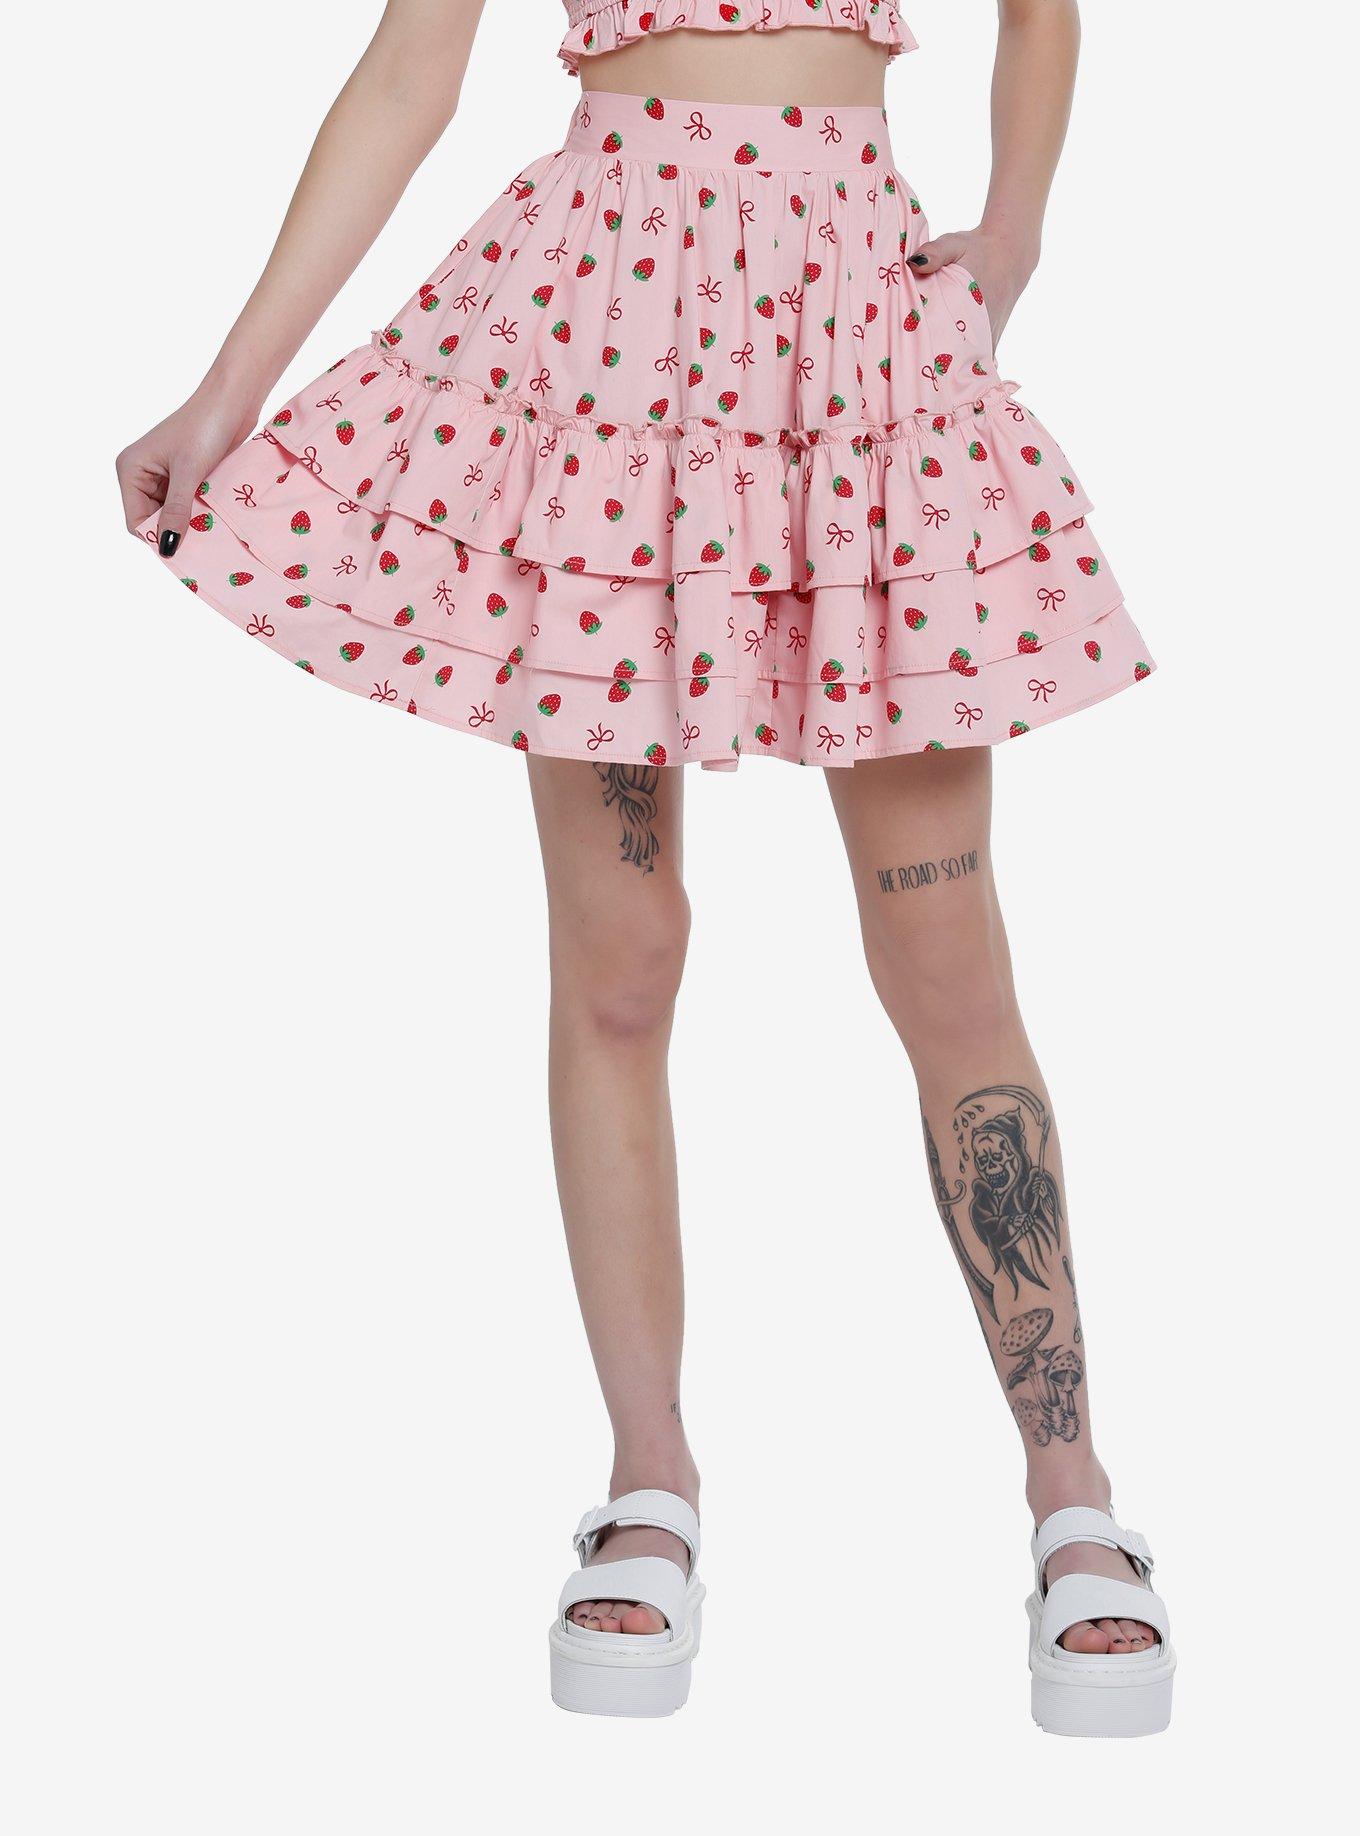 Sweet Society Strawberry & Bows Petticoat Tier Skirt, PINK, hi-res